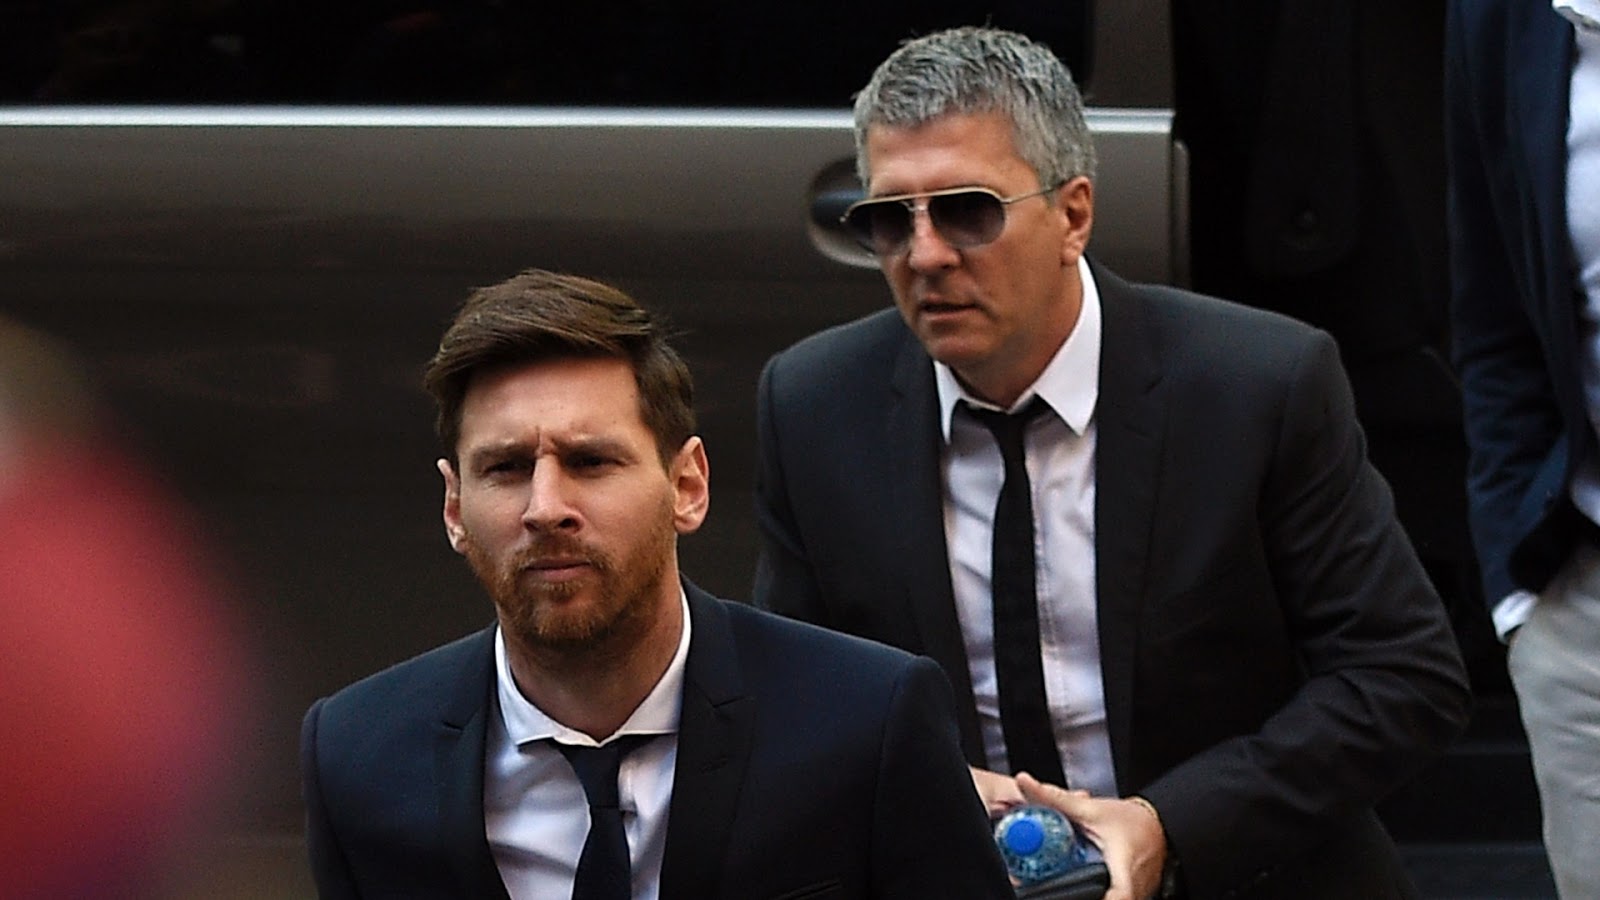 Lionel Messi and his father - Messi Father Car Crash